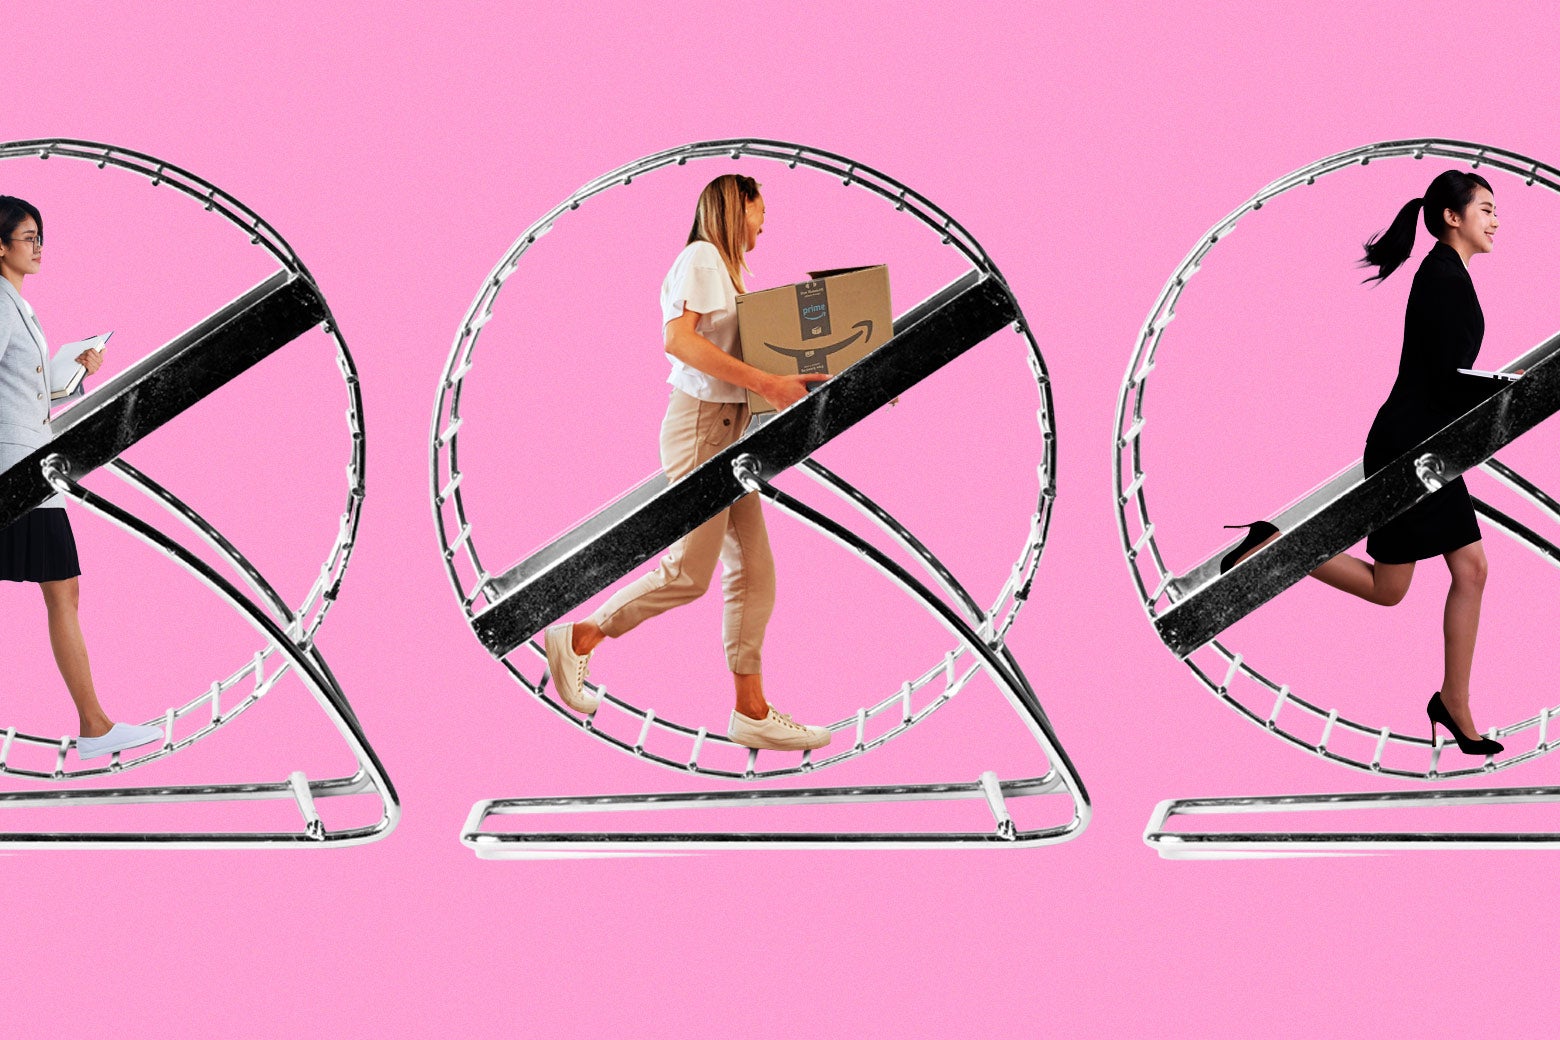 Professionally dressed women running on hamster wheels, including one who is carrying an Amazon box. 